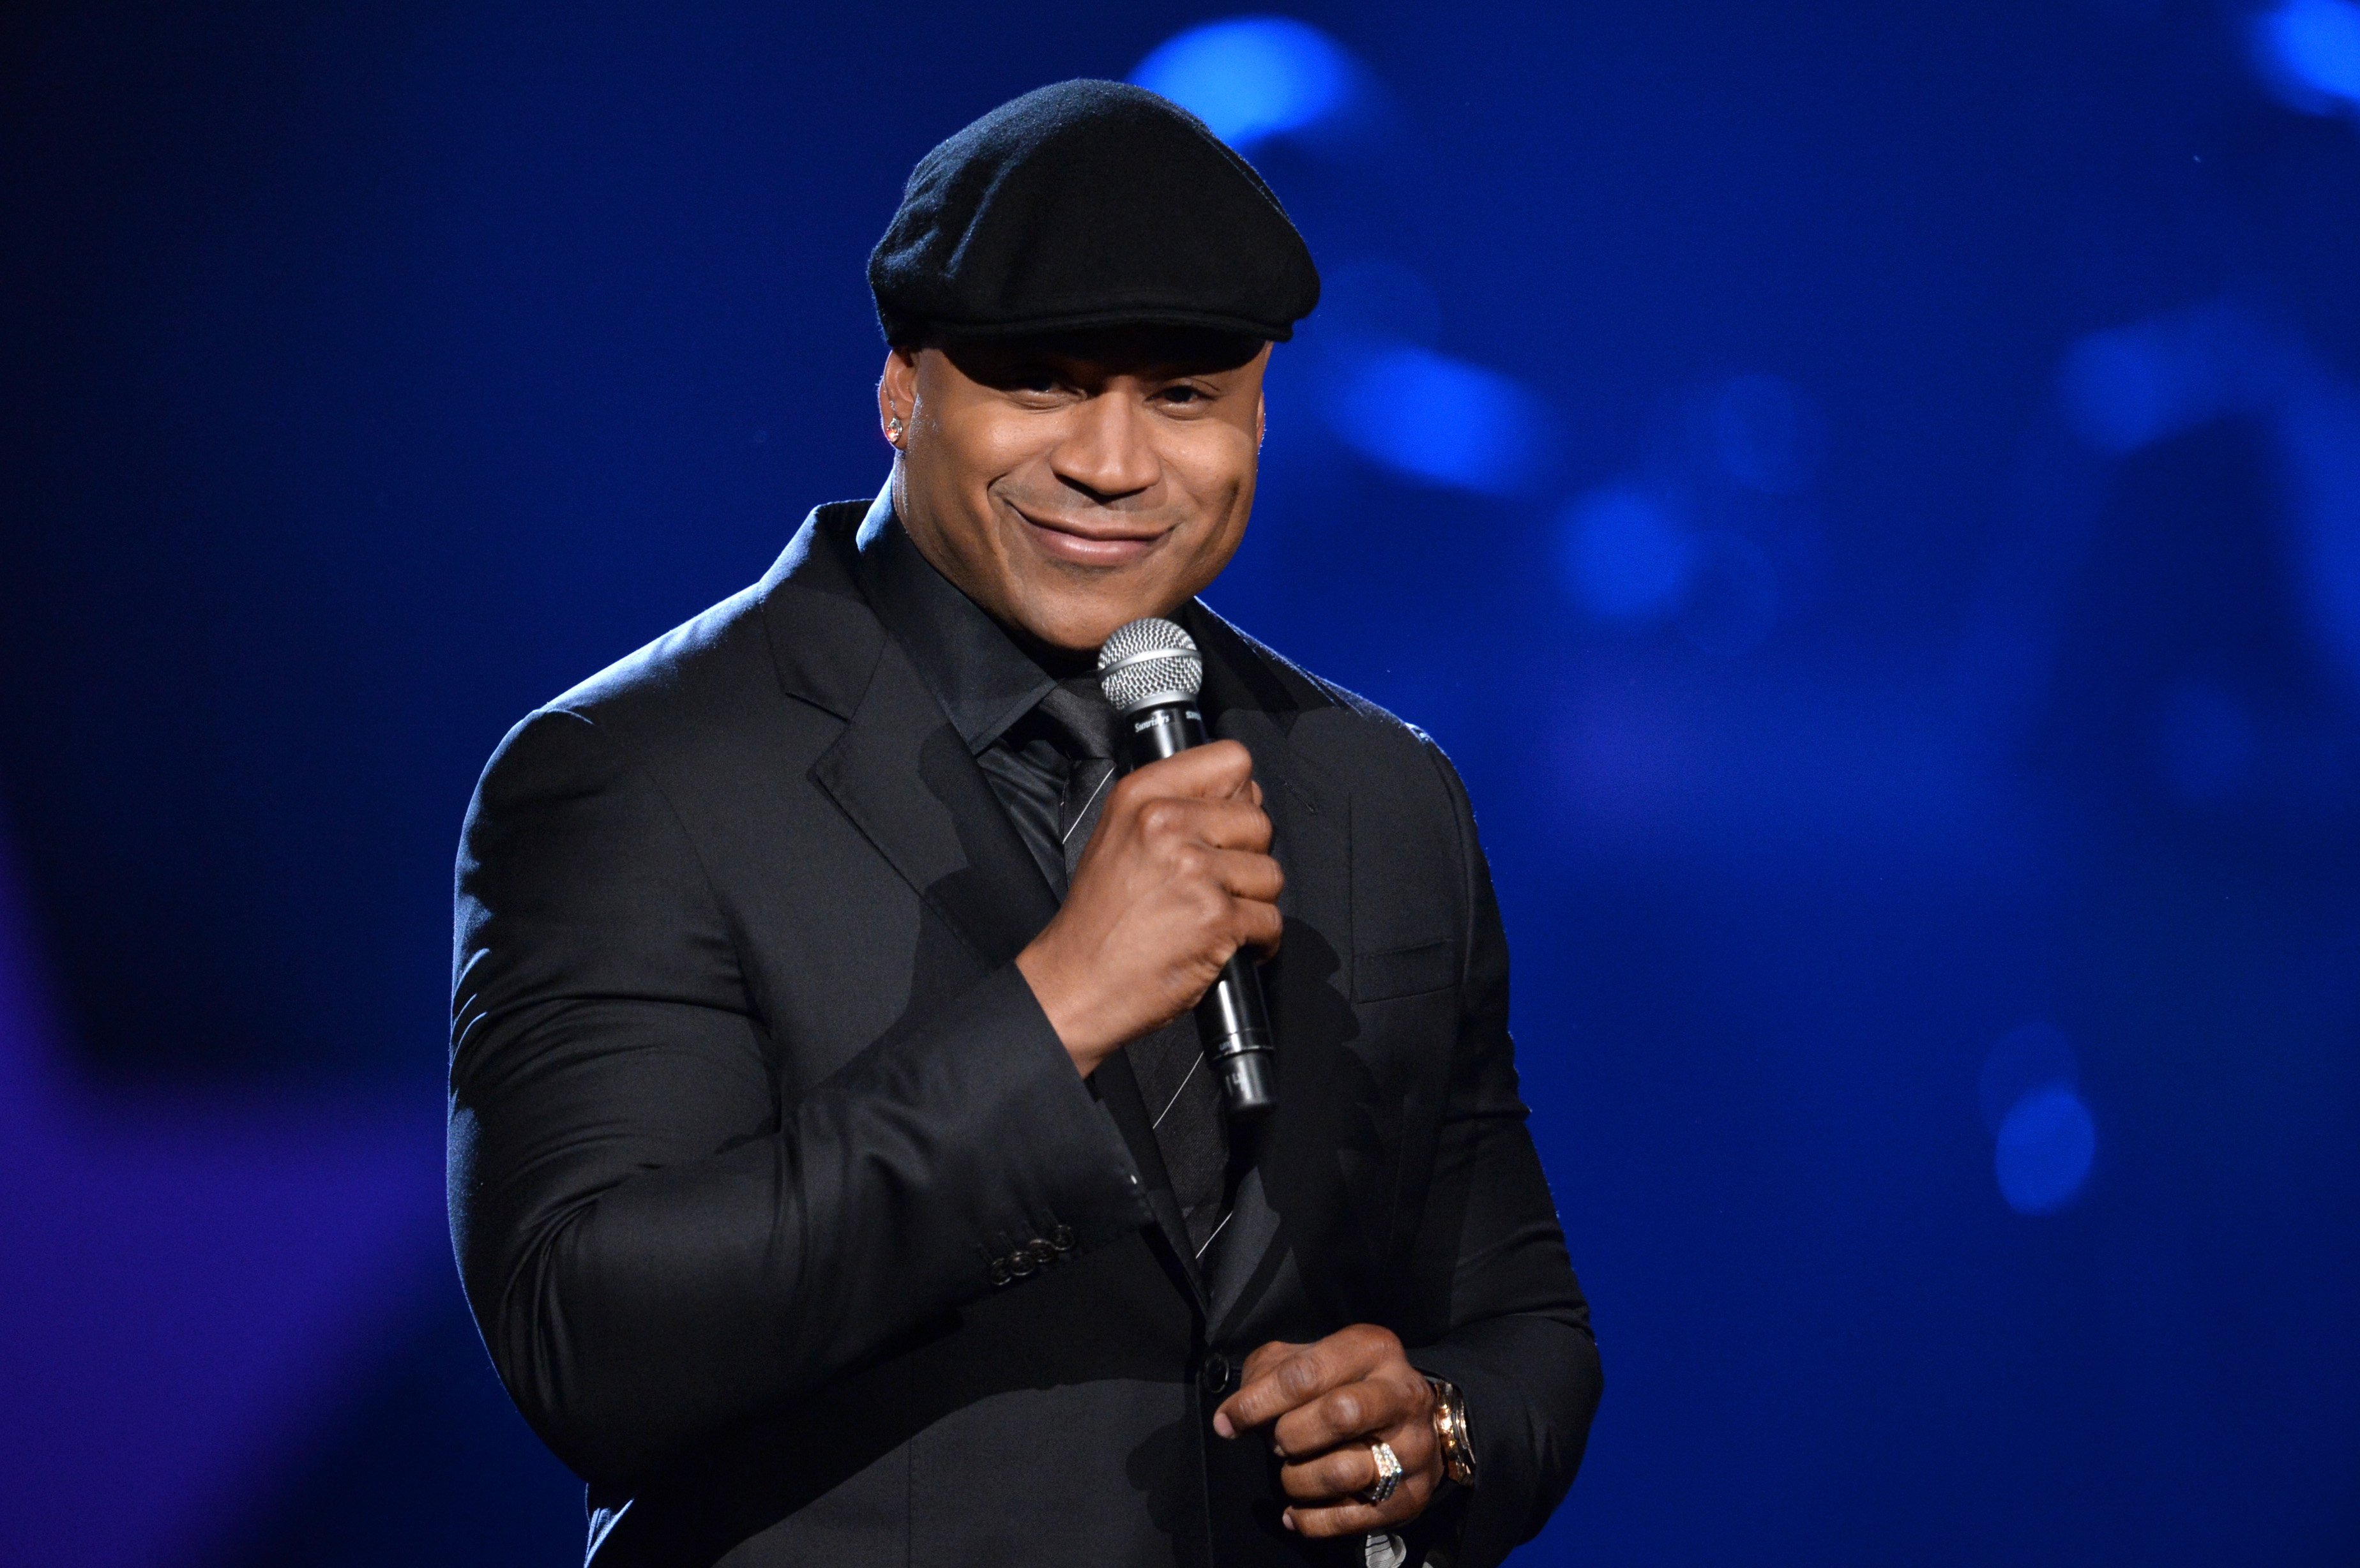 LL Cool J speaks at “A Grammy Salute to the Beatles" at the LA Convention Center on January 27, 2014.| Photo: Getty Images